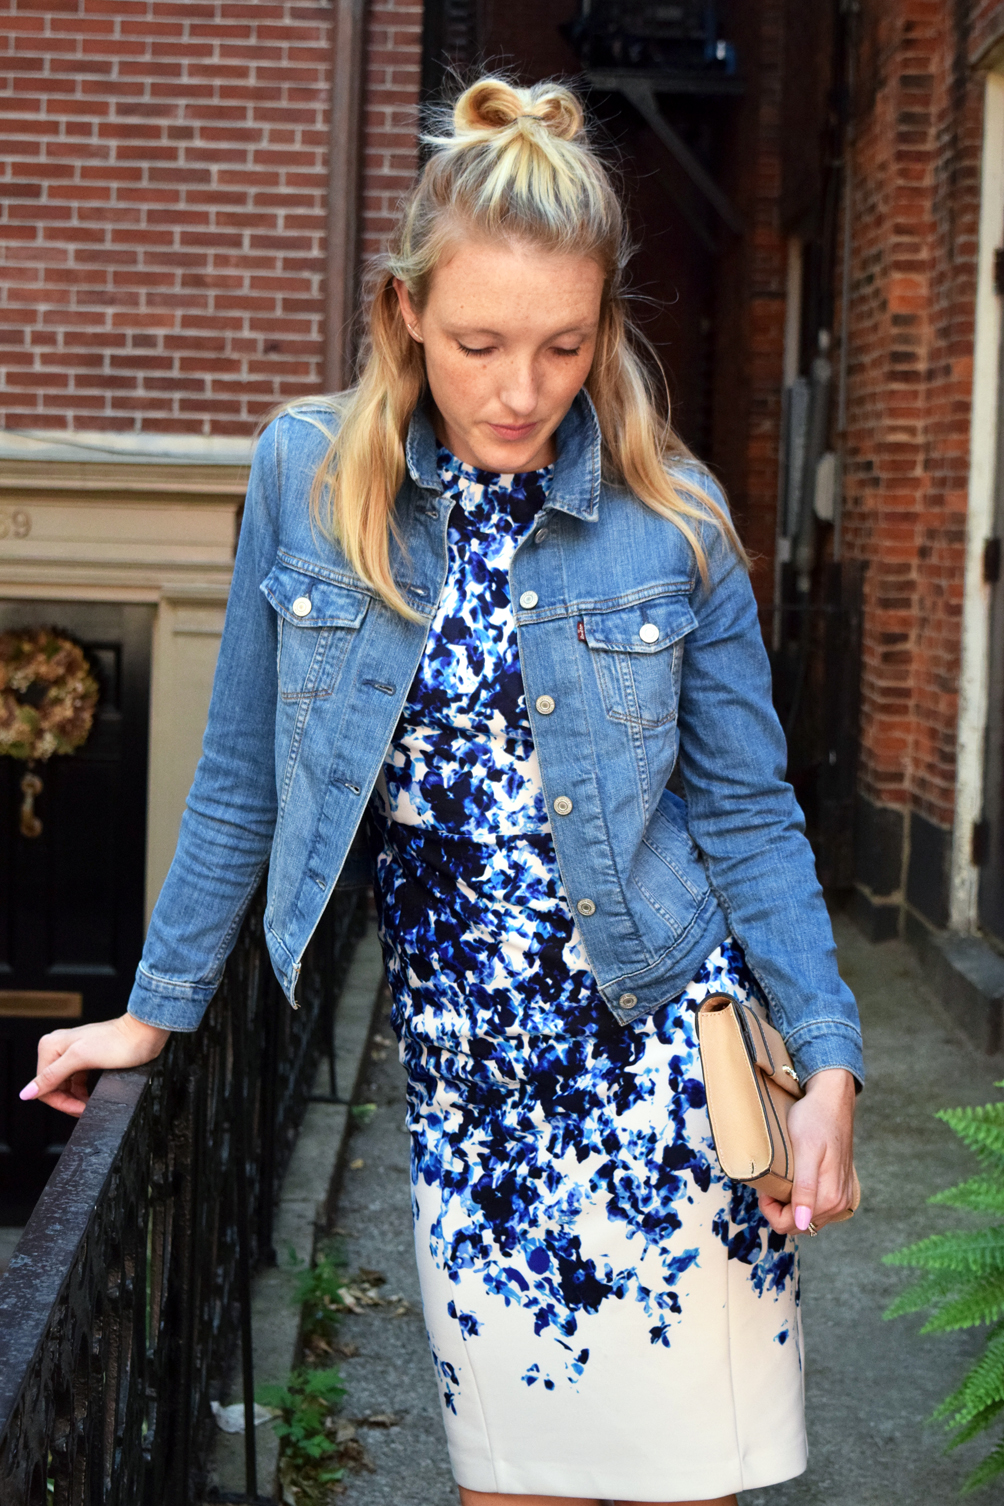 simple outfit inspiration for wearing a denim jacket